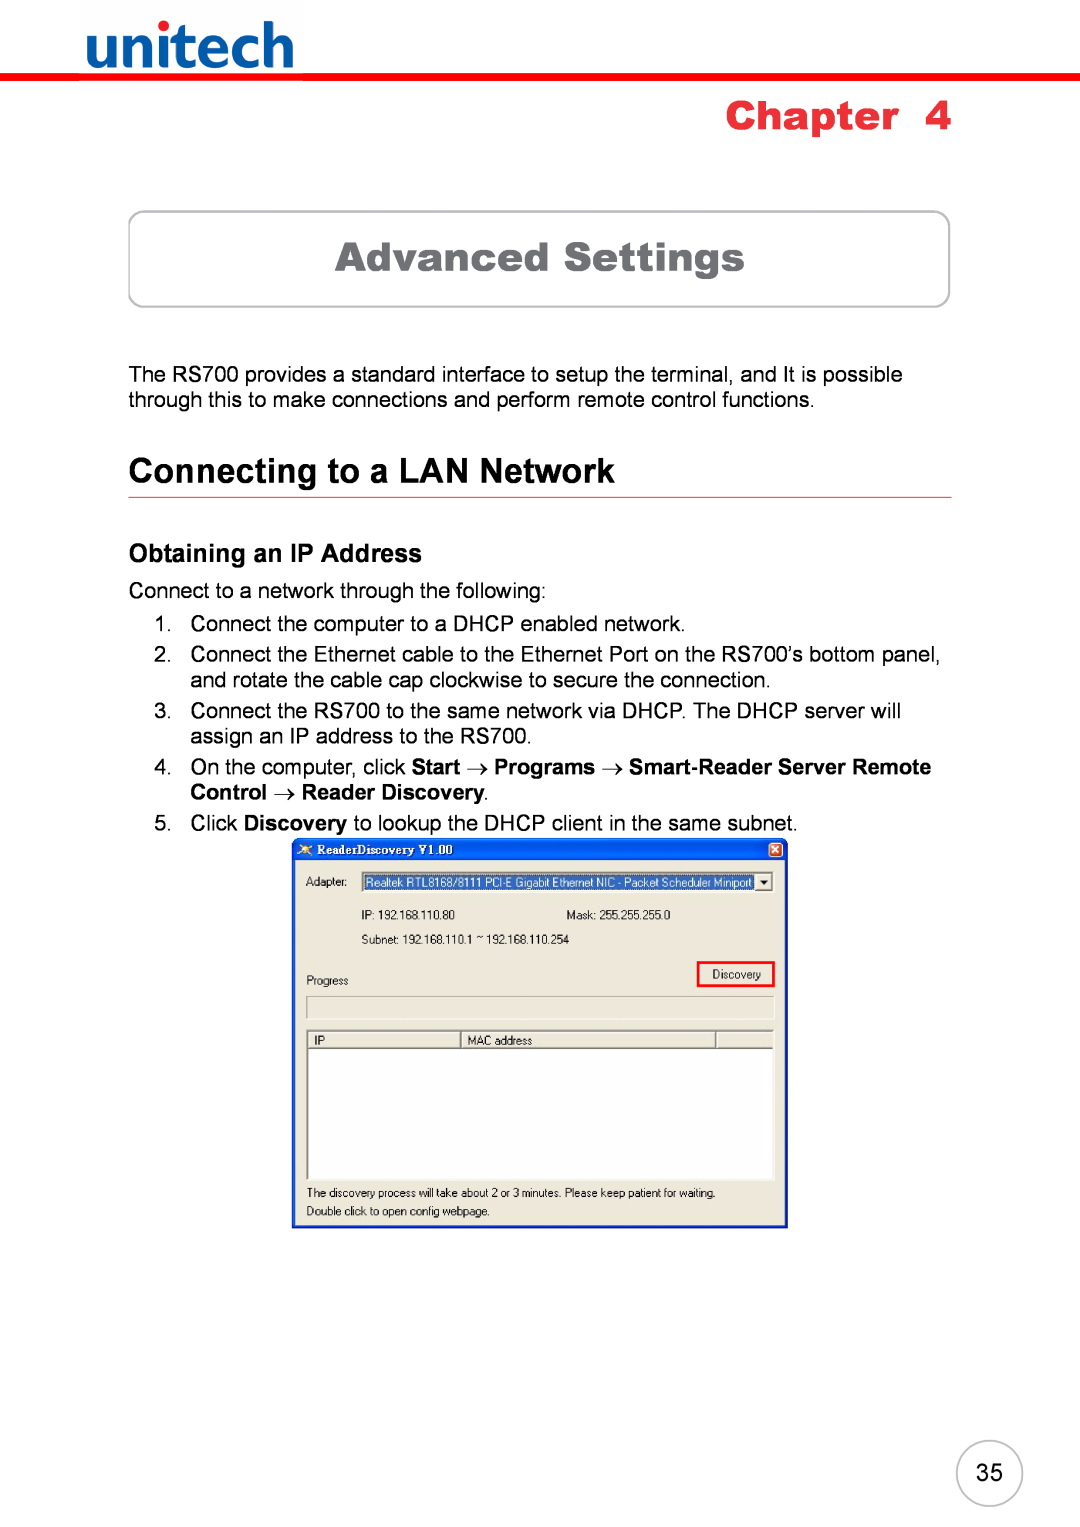 Unitech RS700 user manual Advanced Settings, Connecting to a LAN Network, Obtaining an IP Address, Chapter 